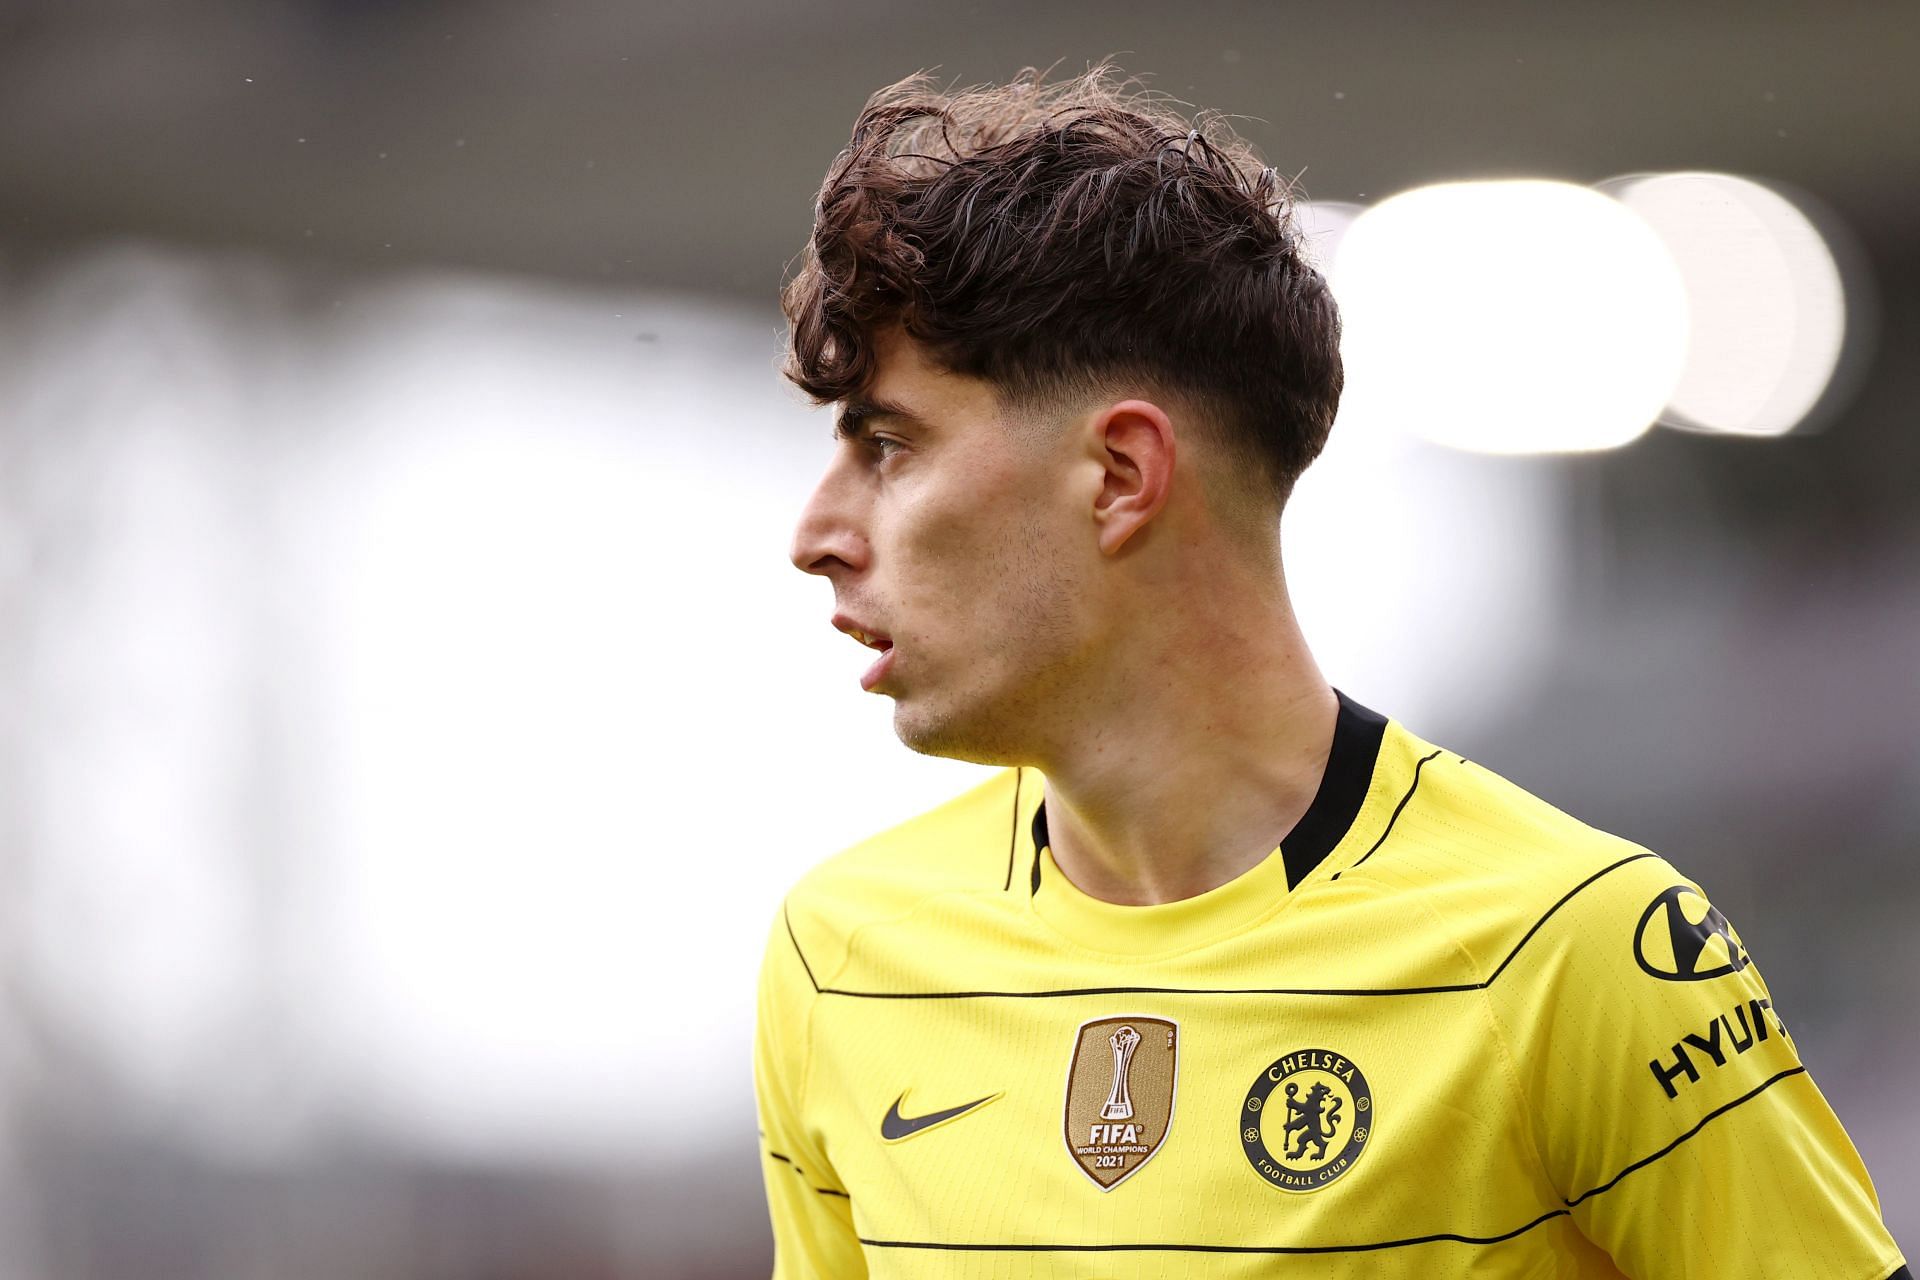 The Bavarians could not sign Kai Havertz due to the arrival of Leroy Sane